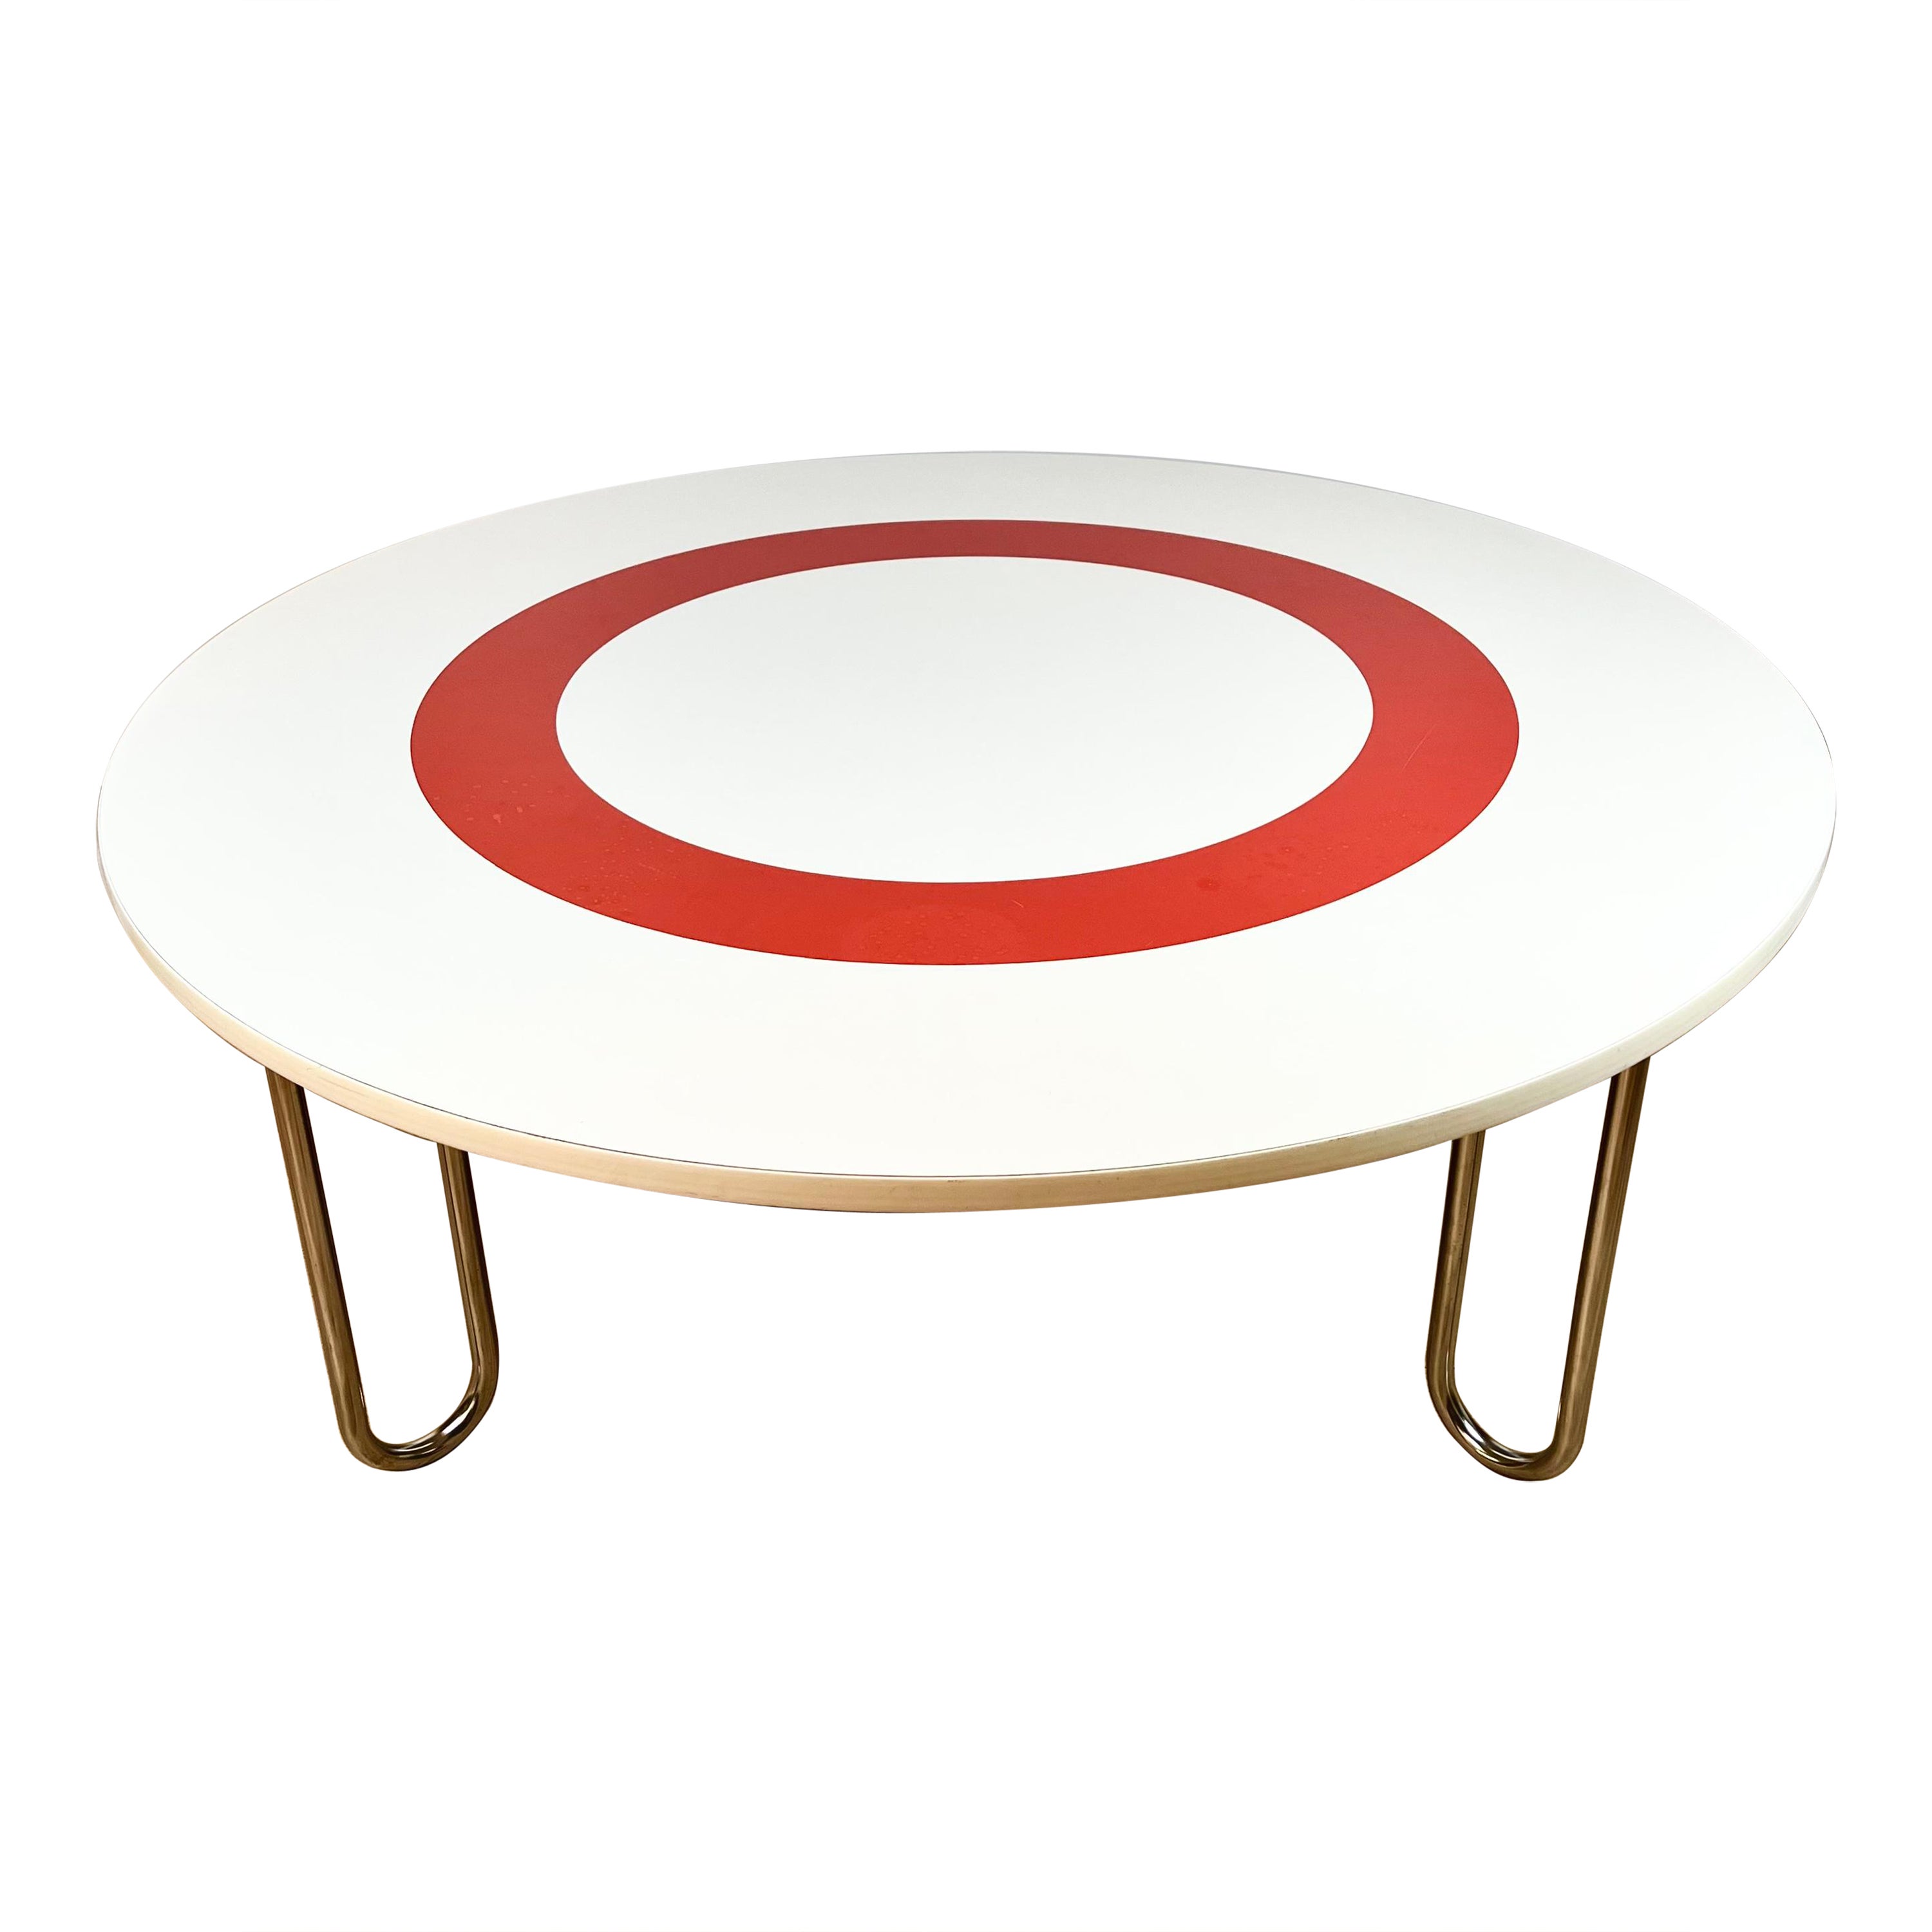 Modernist Mid Century Coffee Table Ruud Ekstrand & Christer Norman, Dux Sweden For Sale